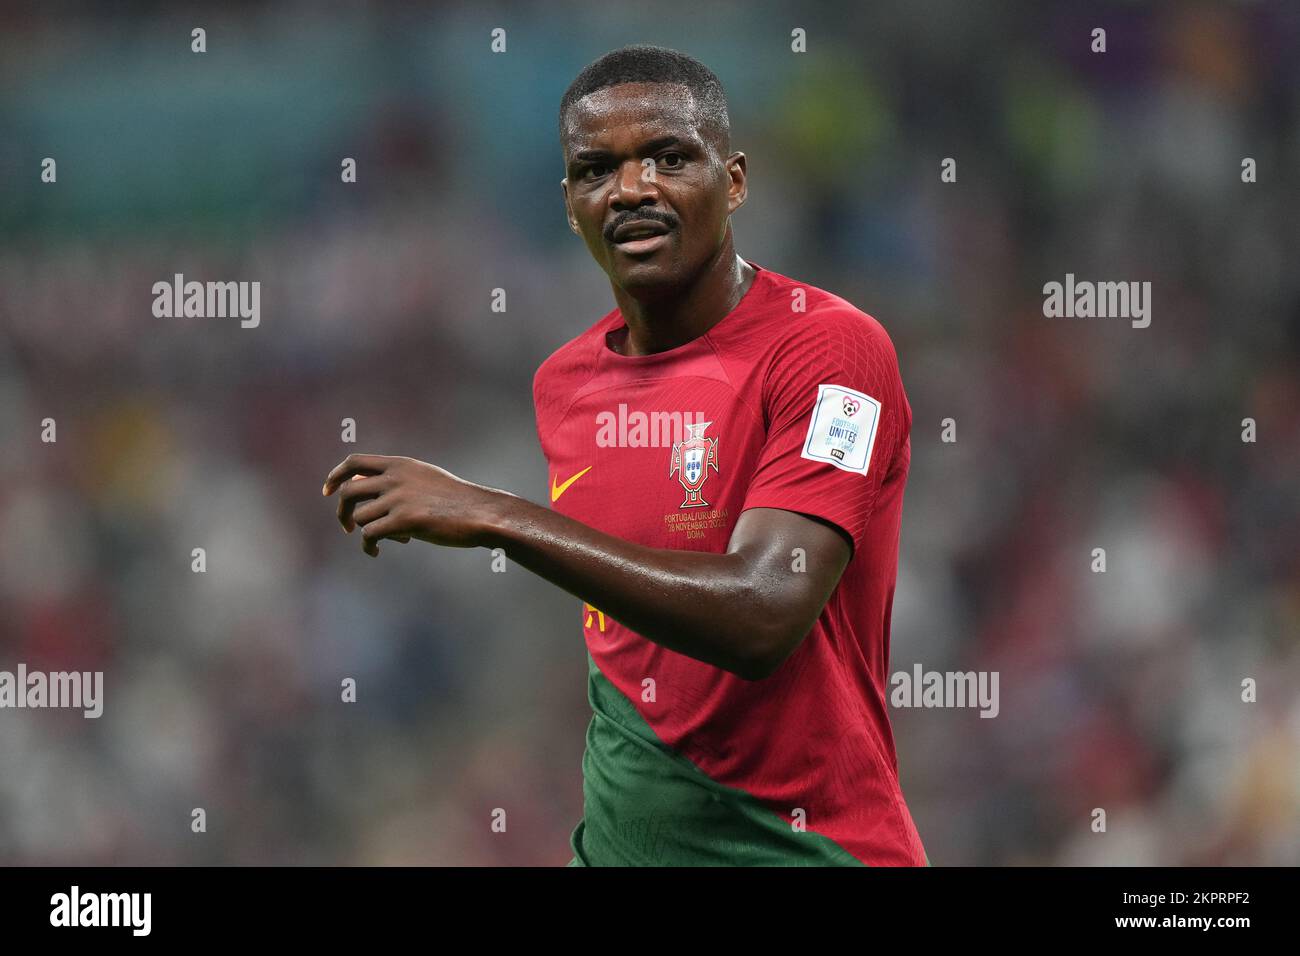 Lusail, Qatar. 28th Nov, 2022. William Carvalho of Portugal during the FIFA World Cup Qatar 2022 match, Group H, between Portugal and Uruguay played at Lusail Stadium on Nov 28, 2022 in Lusail, Qatar. (Photo by Bagu Blanco/PRESSIN) Credit: Sipa USA/Alamy Live News Stock Photo